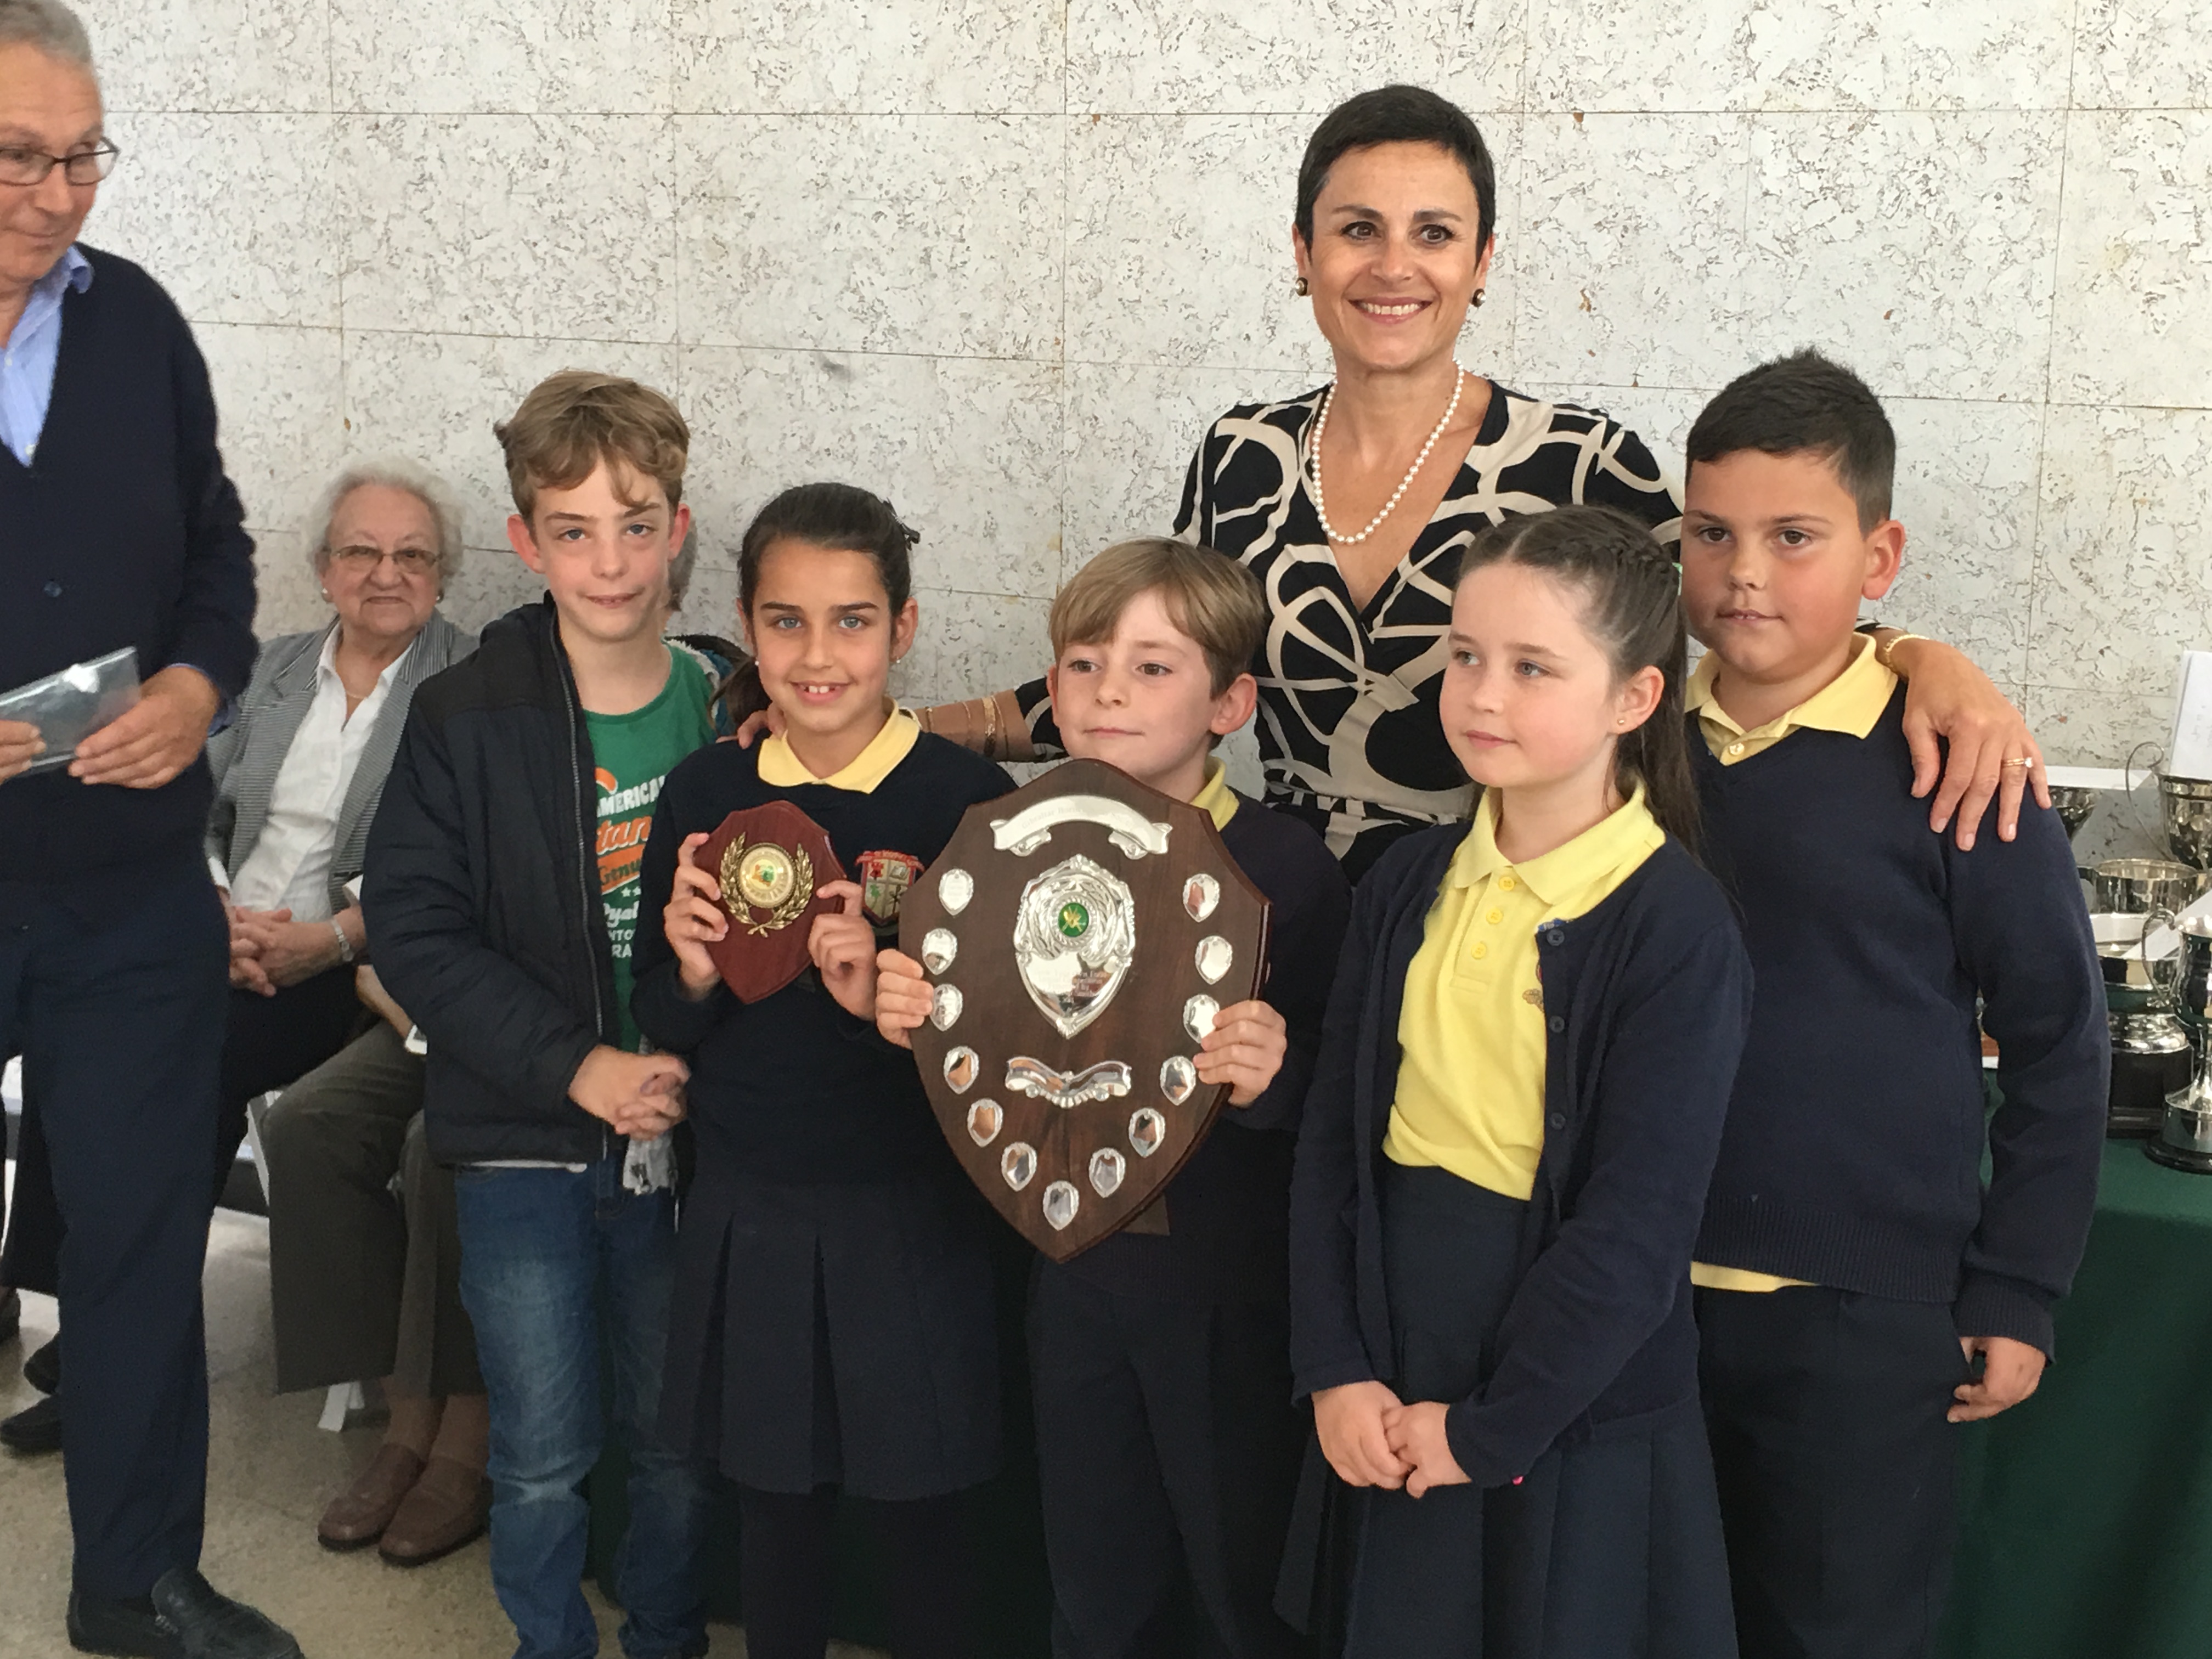 St Joseph's First School received the first prize in the 'Grow your own food' section of the Gibraltar Flower Show